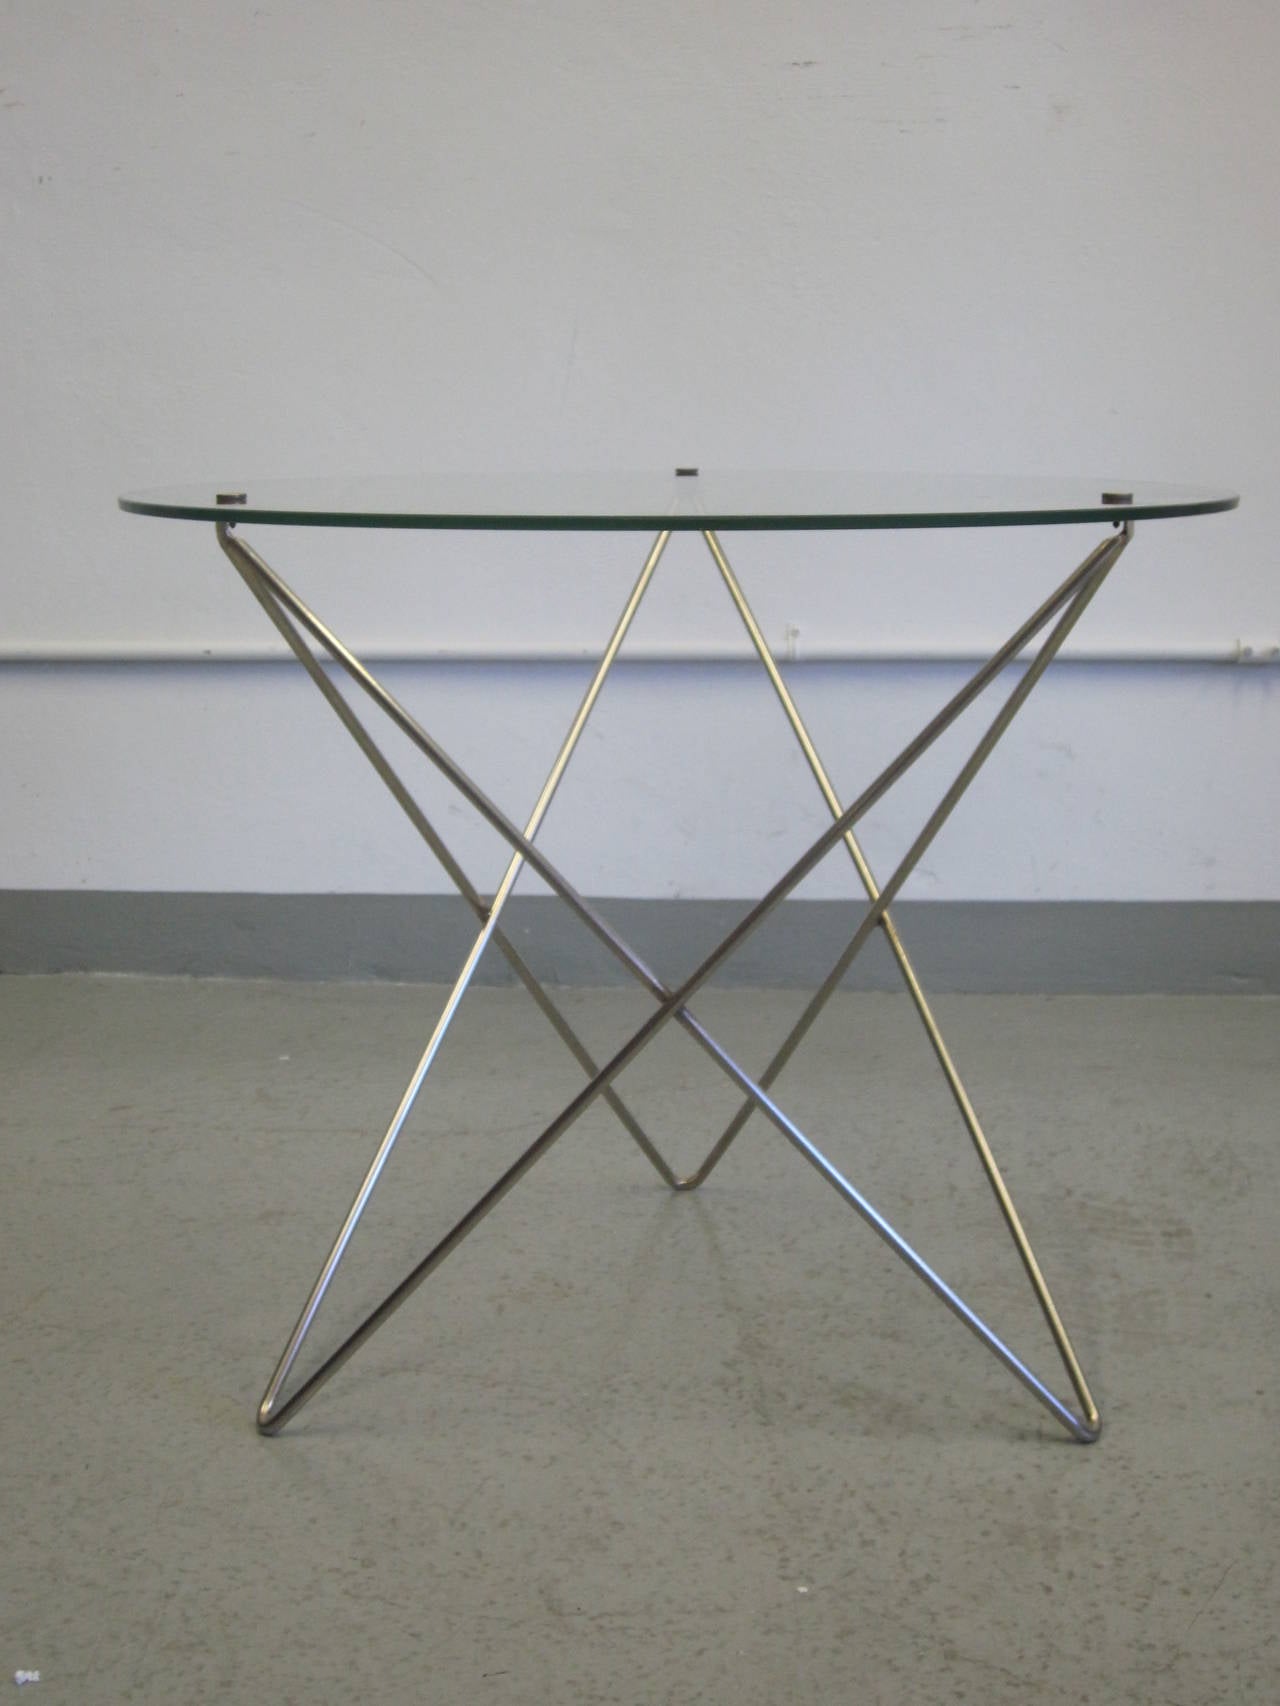 Elegant pair of Italian Mid-Century Modern end tables in stainless steel supporting round pierced glass tops.

The structures are composed of sober tripod frames that intersect at angles forming a neoclassical X-form. The glass is pierced and held